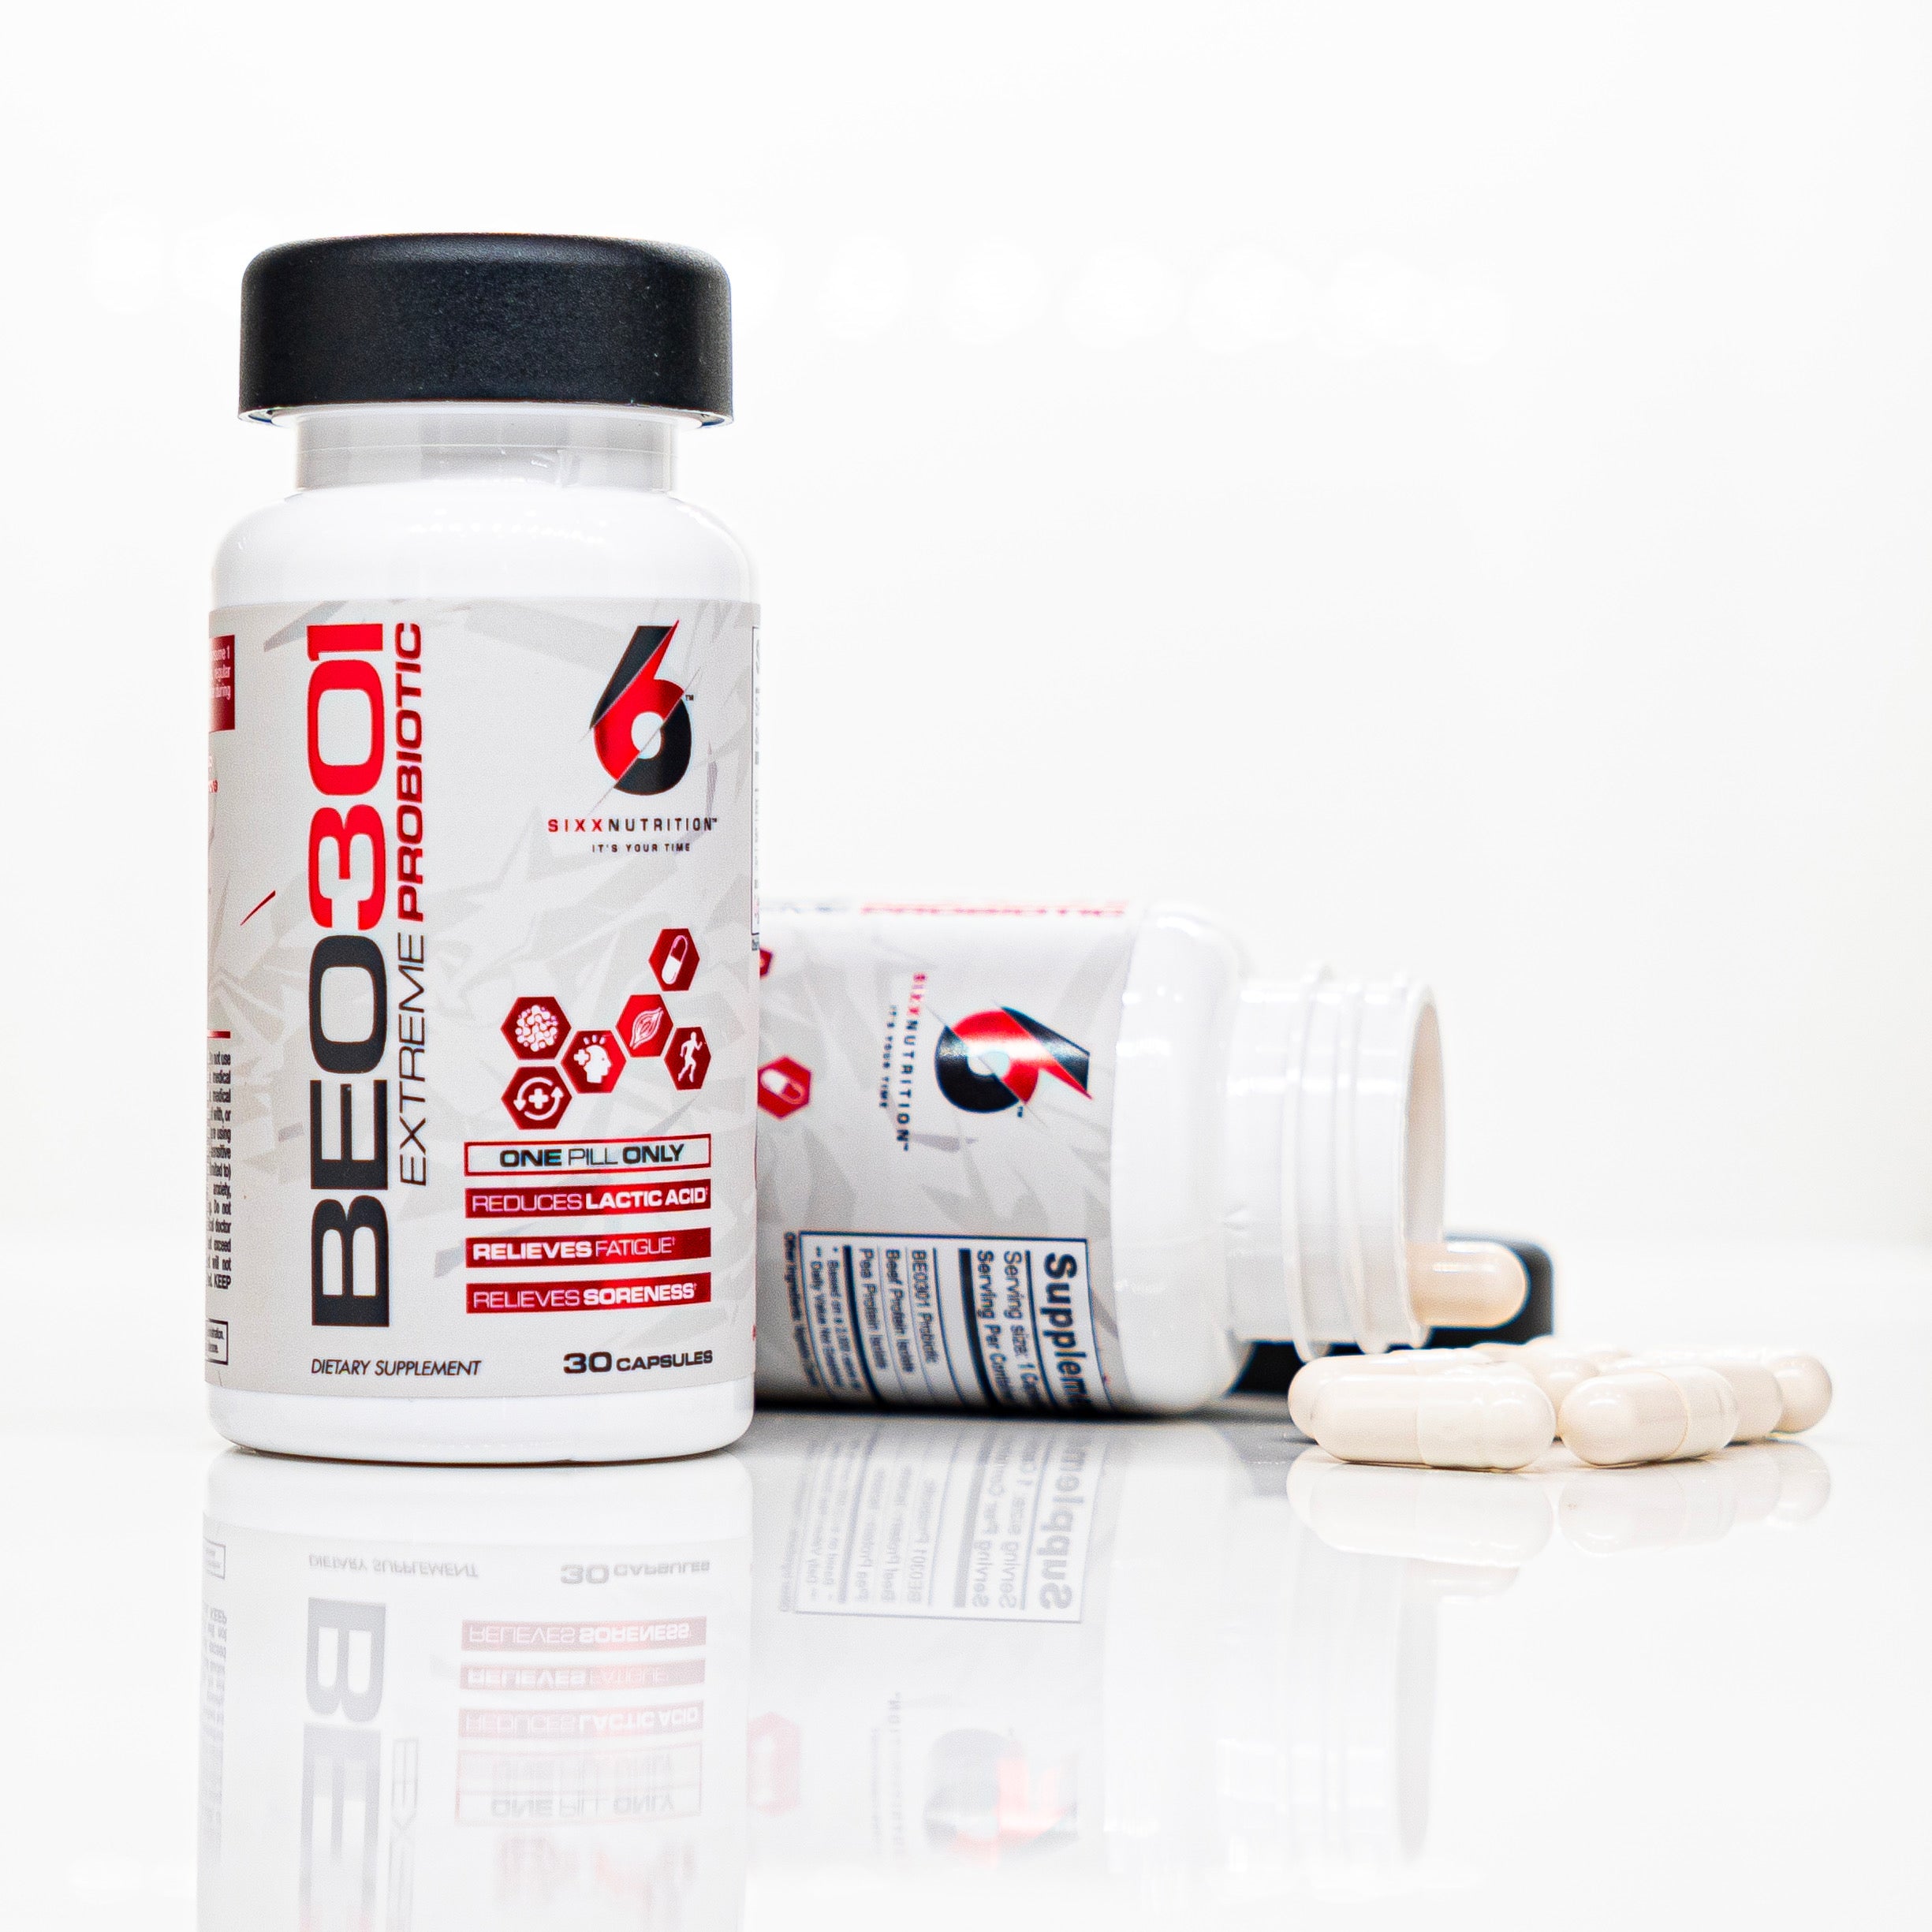 BE0301 Extreme Probiotic by Sixx Nutrition 1 pill, maintains gut health formulated for athletes.